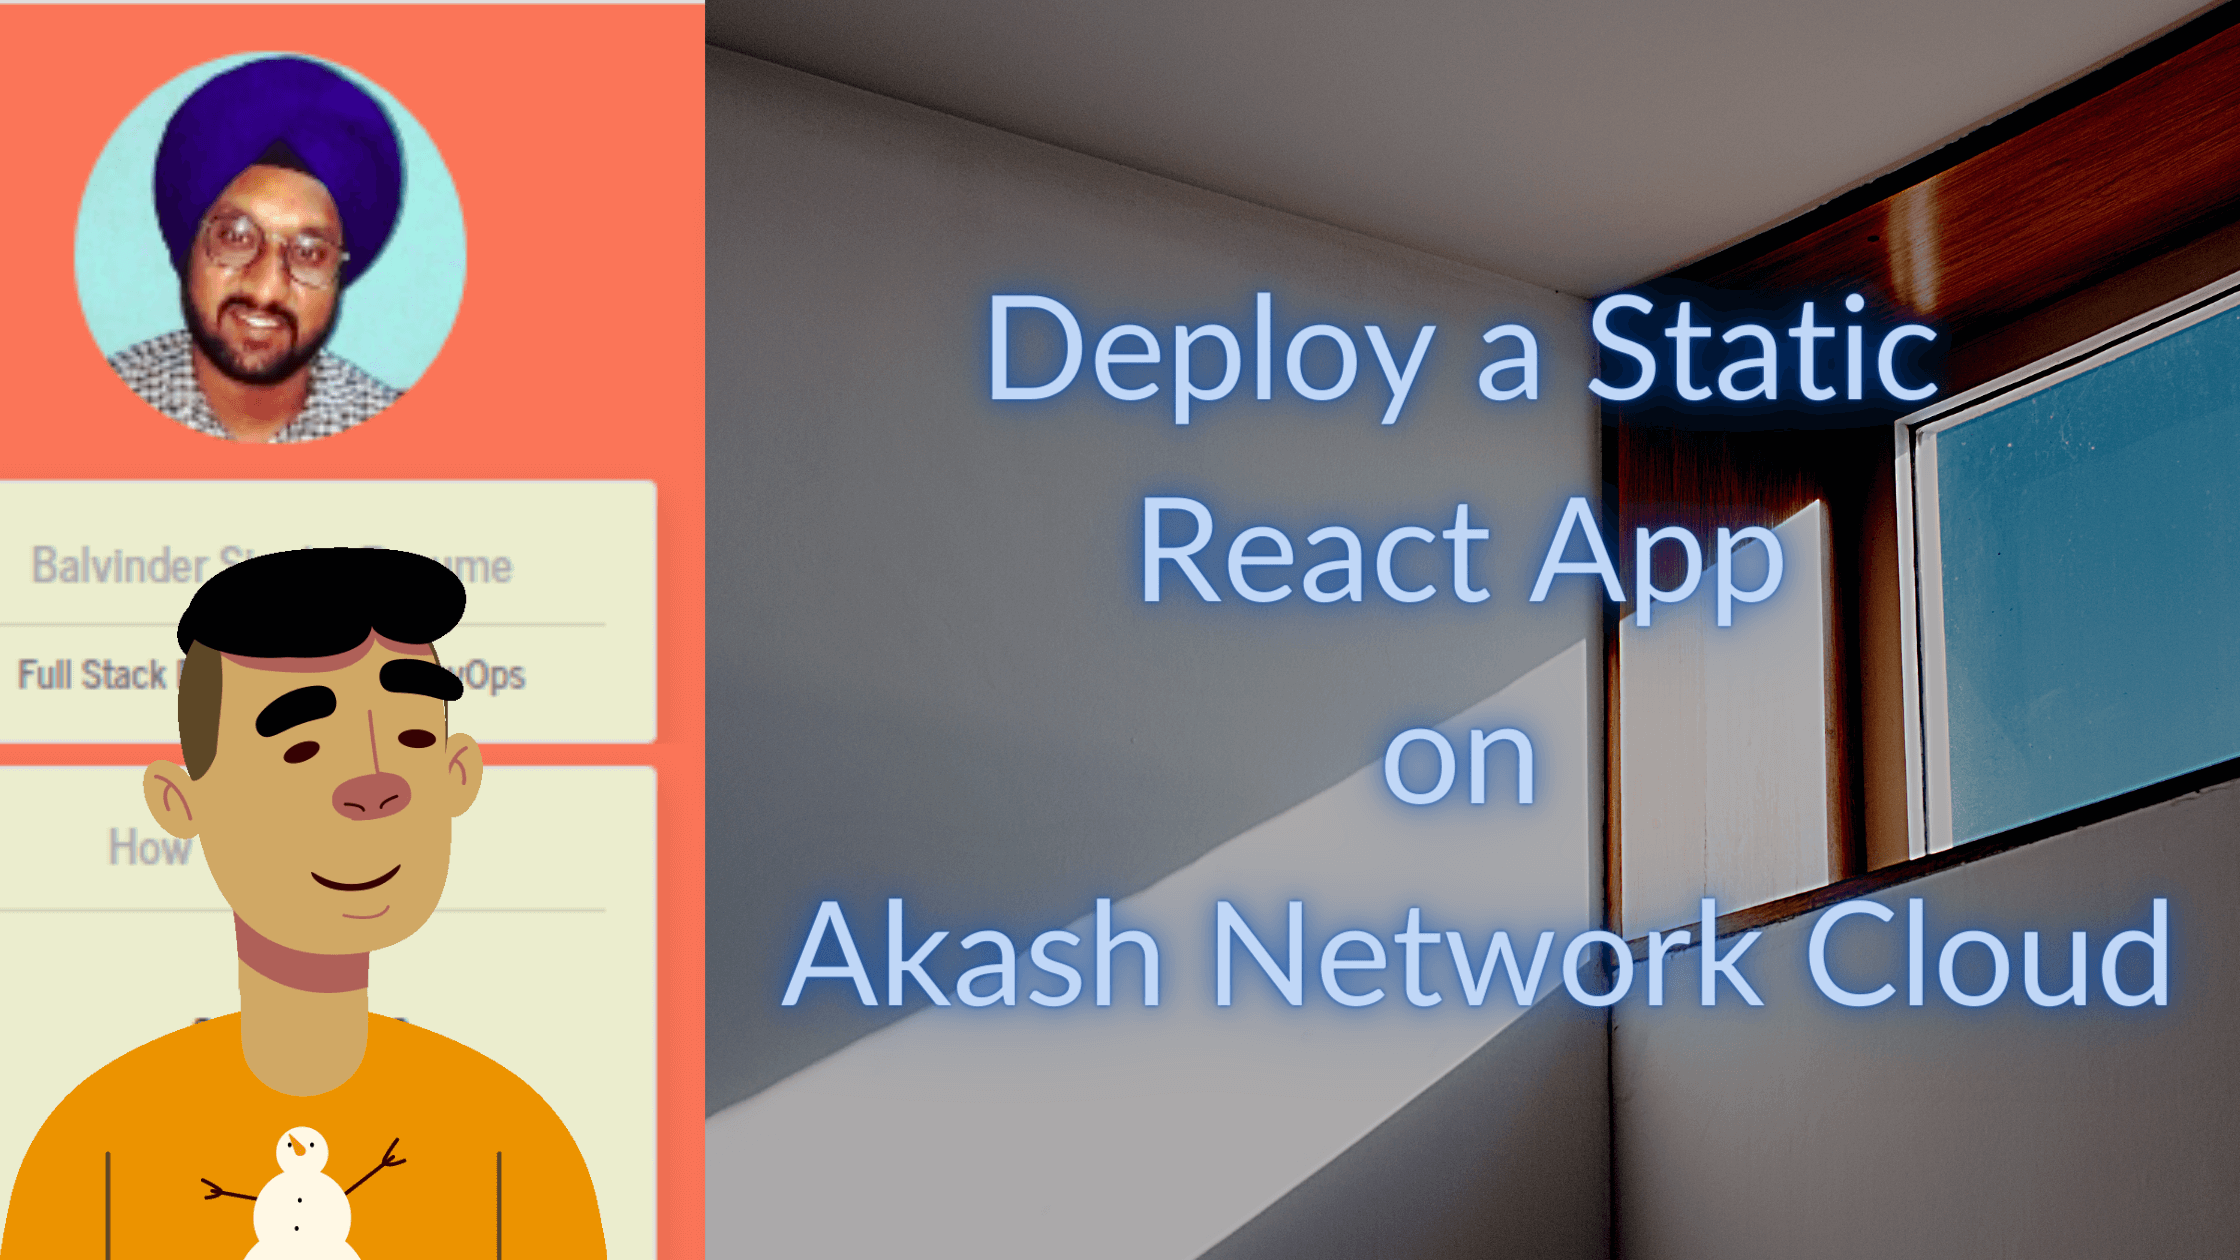 Deploy a Static React App on Akash Network Cloud (1).png